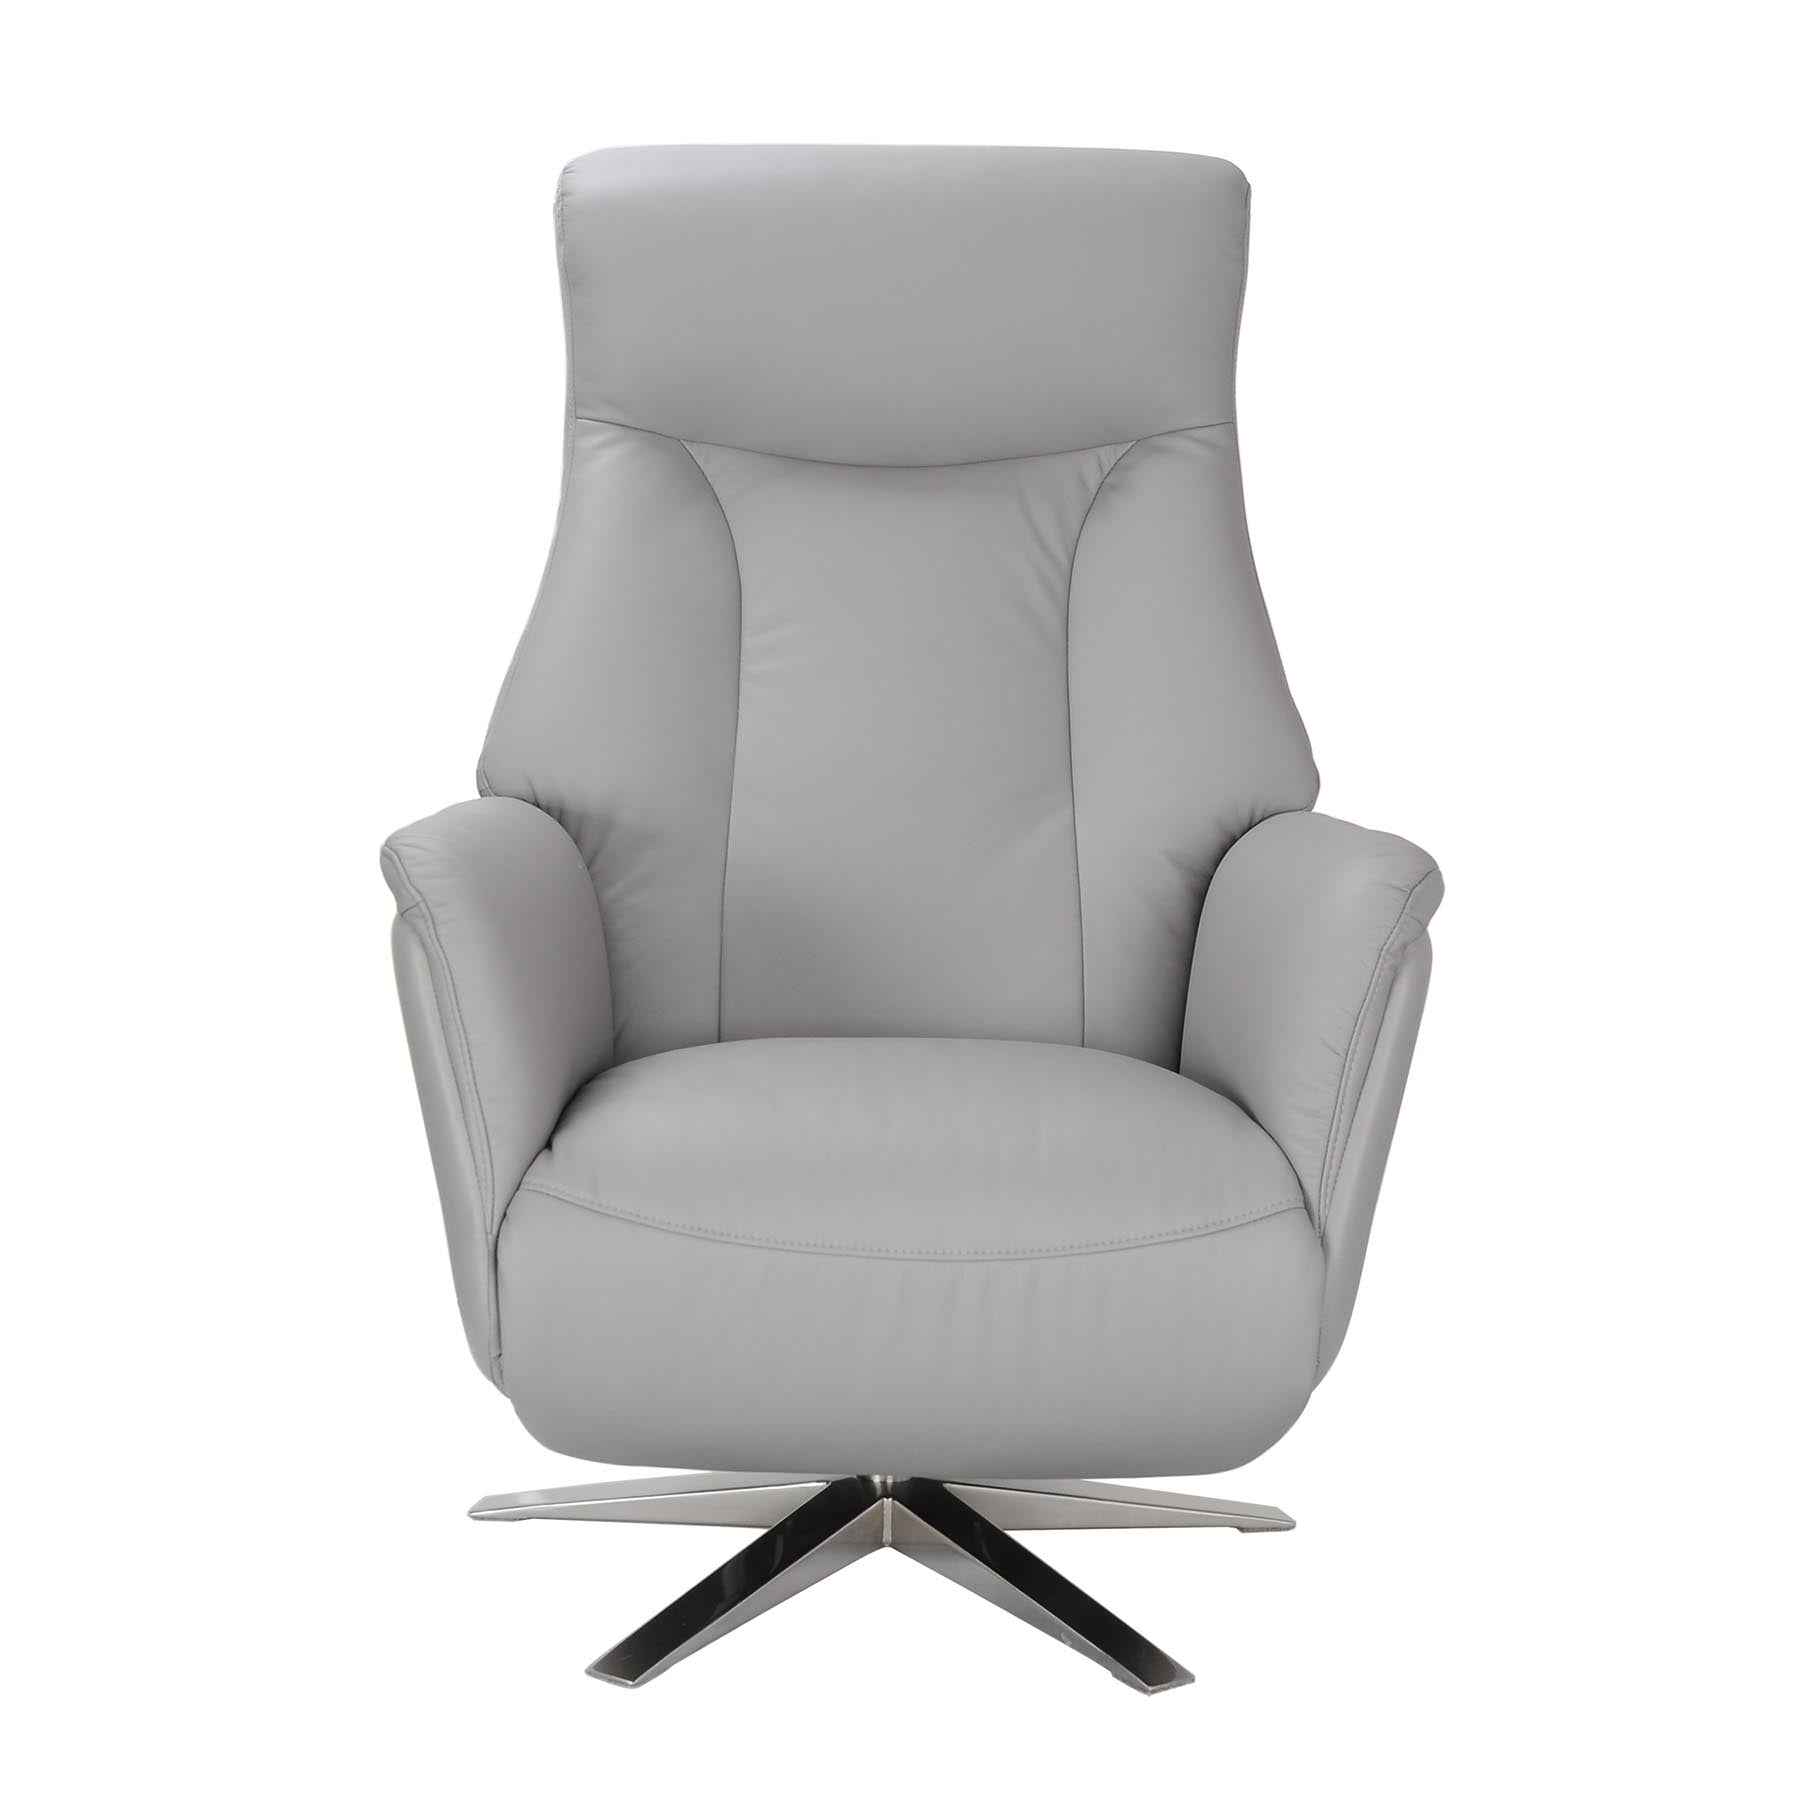 Sicily Leather Look Swivel Power Recliner Chair - Platinum